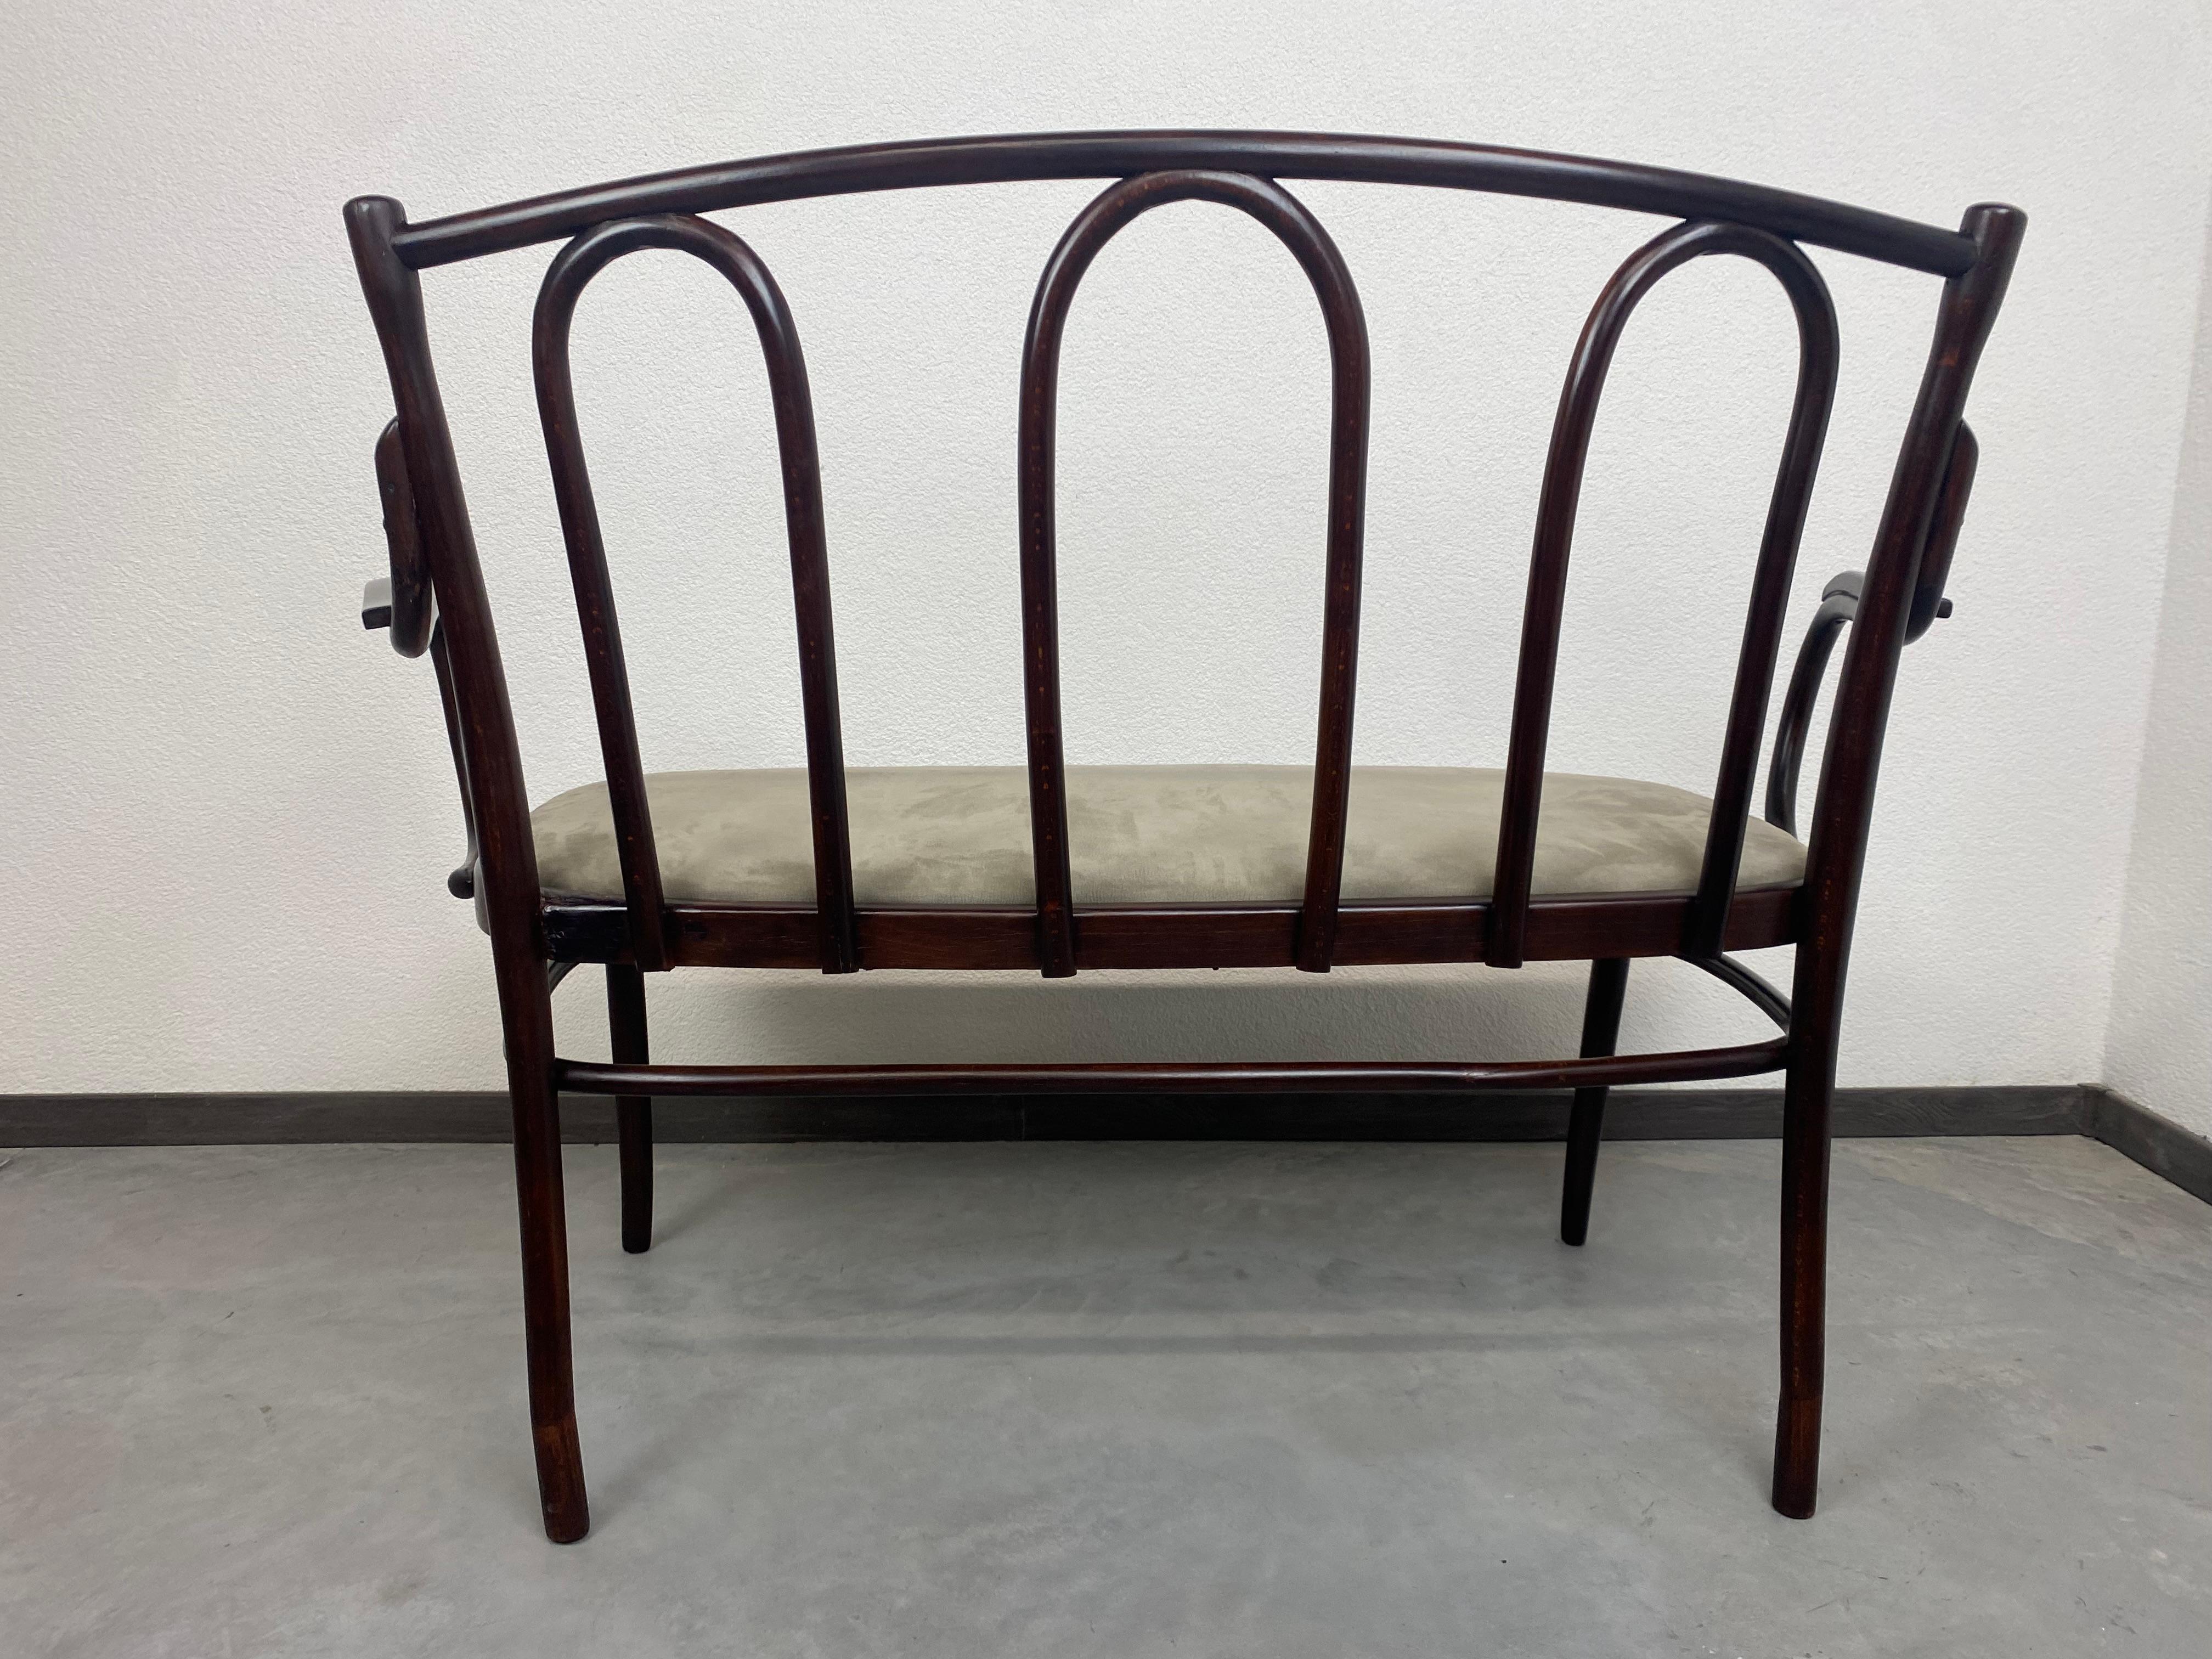 Early 20th Century Thonet Sofa No.56 For Sale